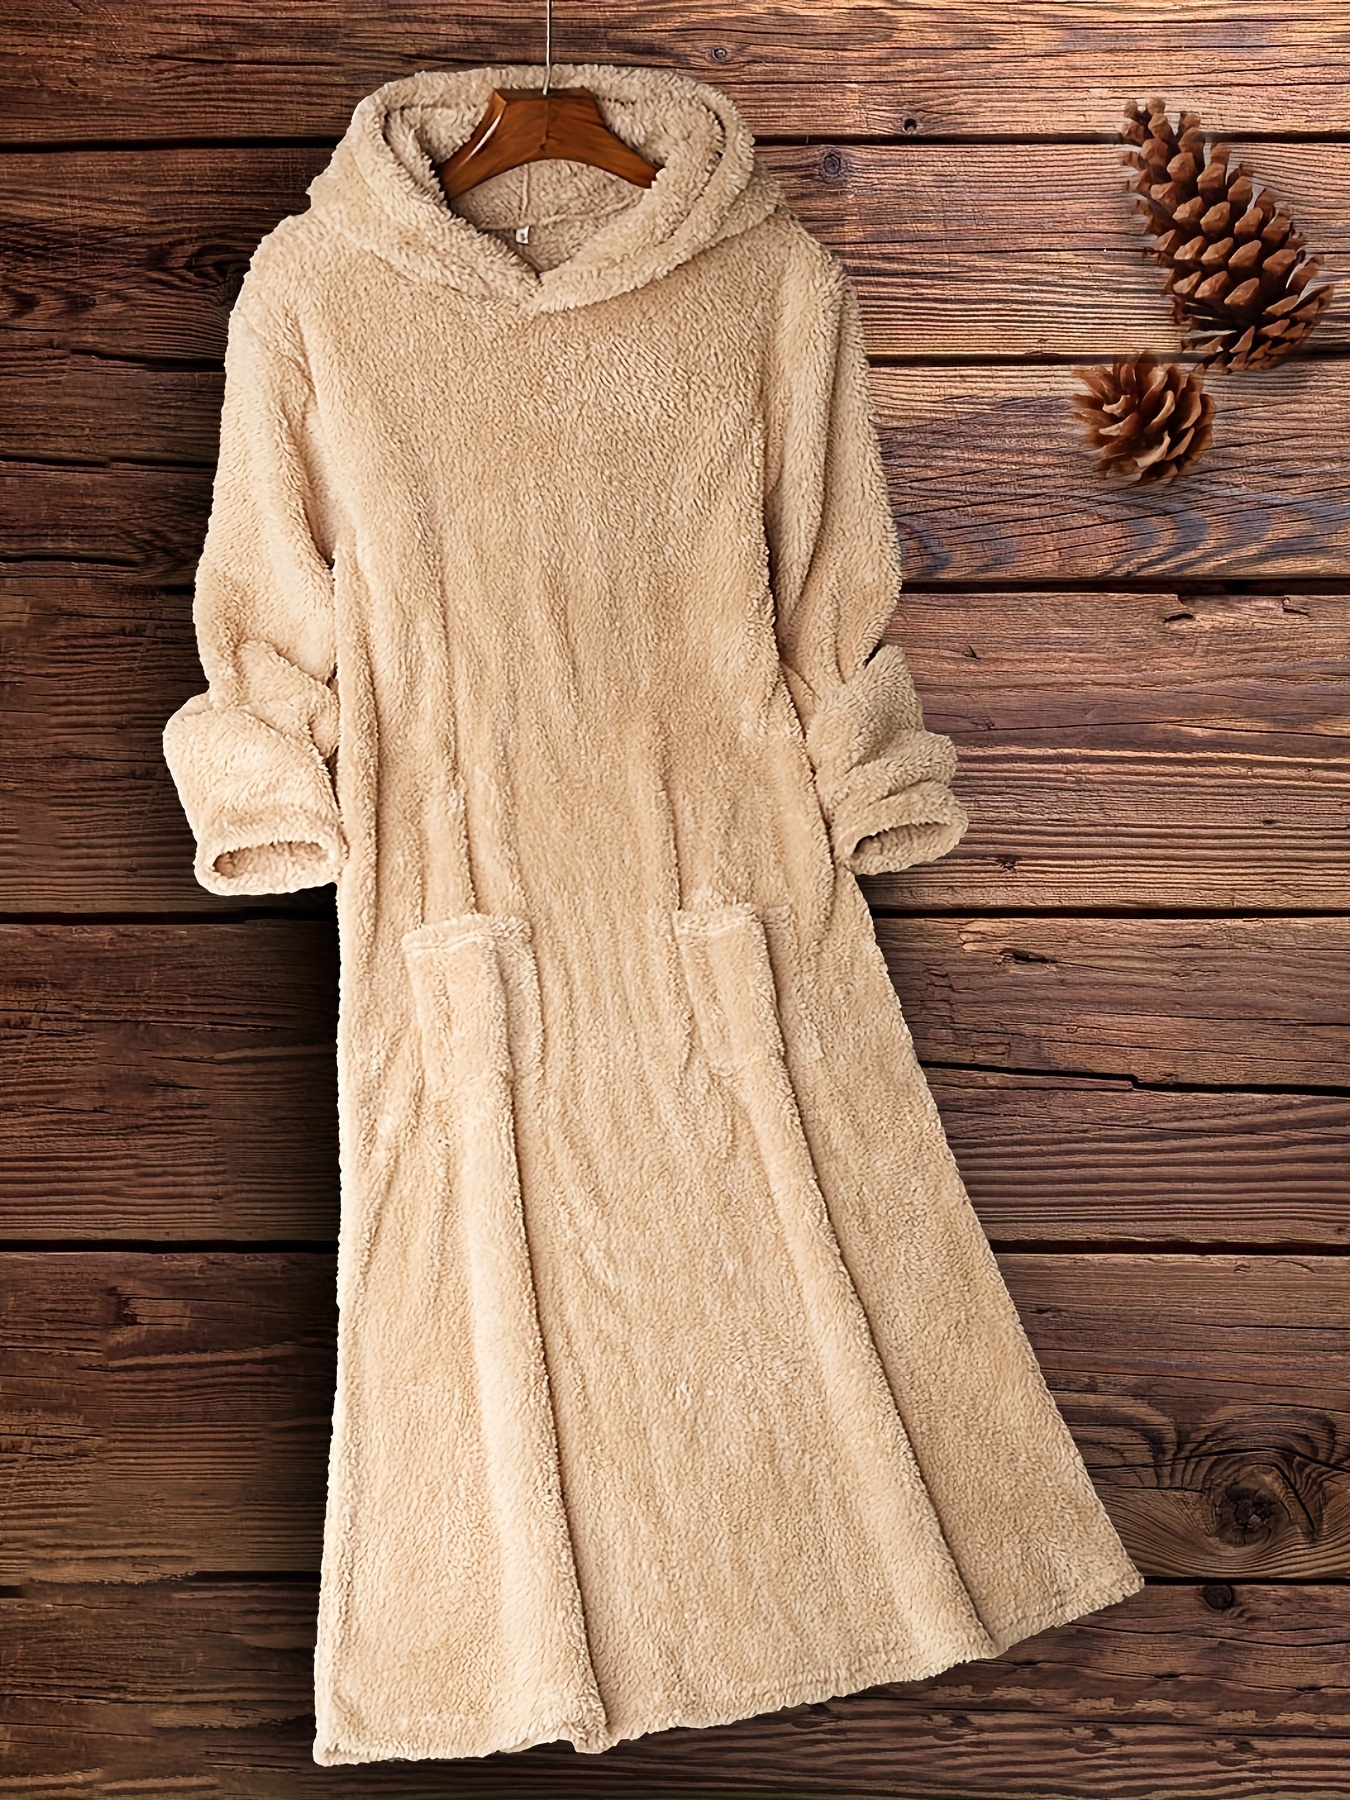 fuzzy hooded midi dress casual pocket front solid long sleeve dress womens clothing details 8